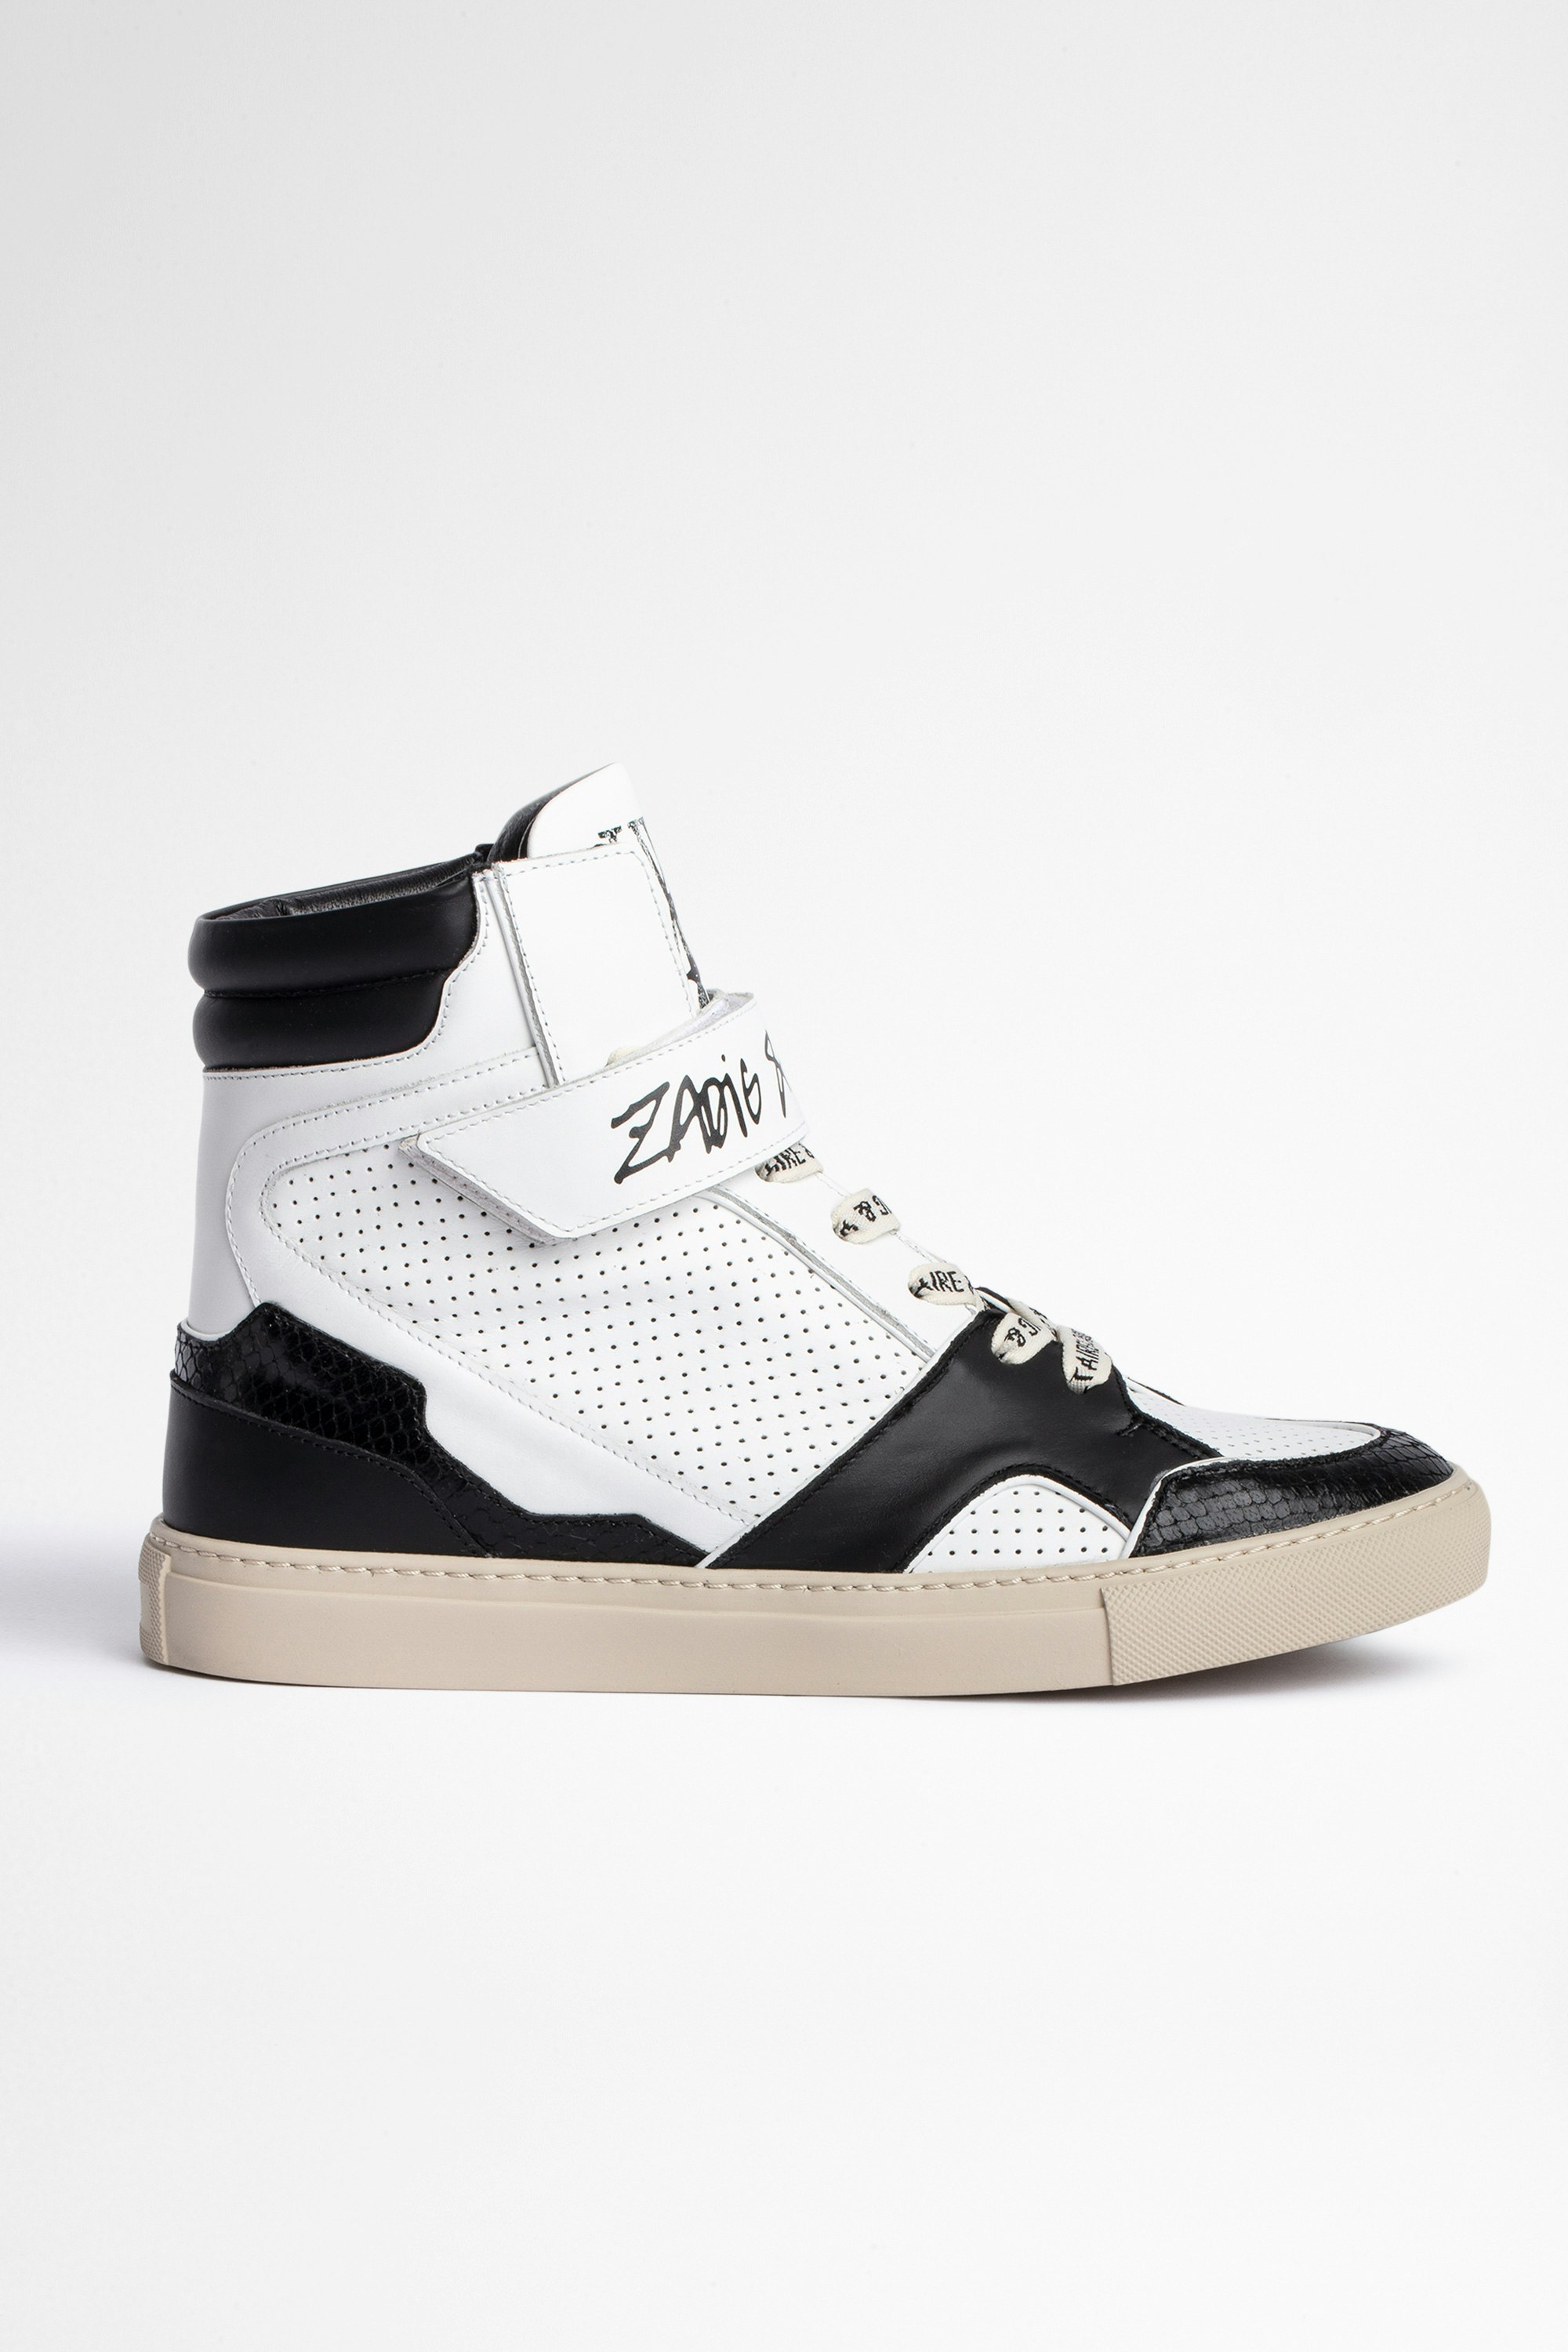 ZV1747 High Flash Sneakers Women's high-top trainers in bicolored leather. Buying this product, you support a responsible leather production through Leather Working Group.